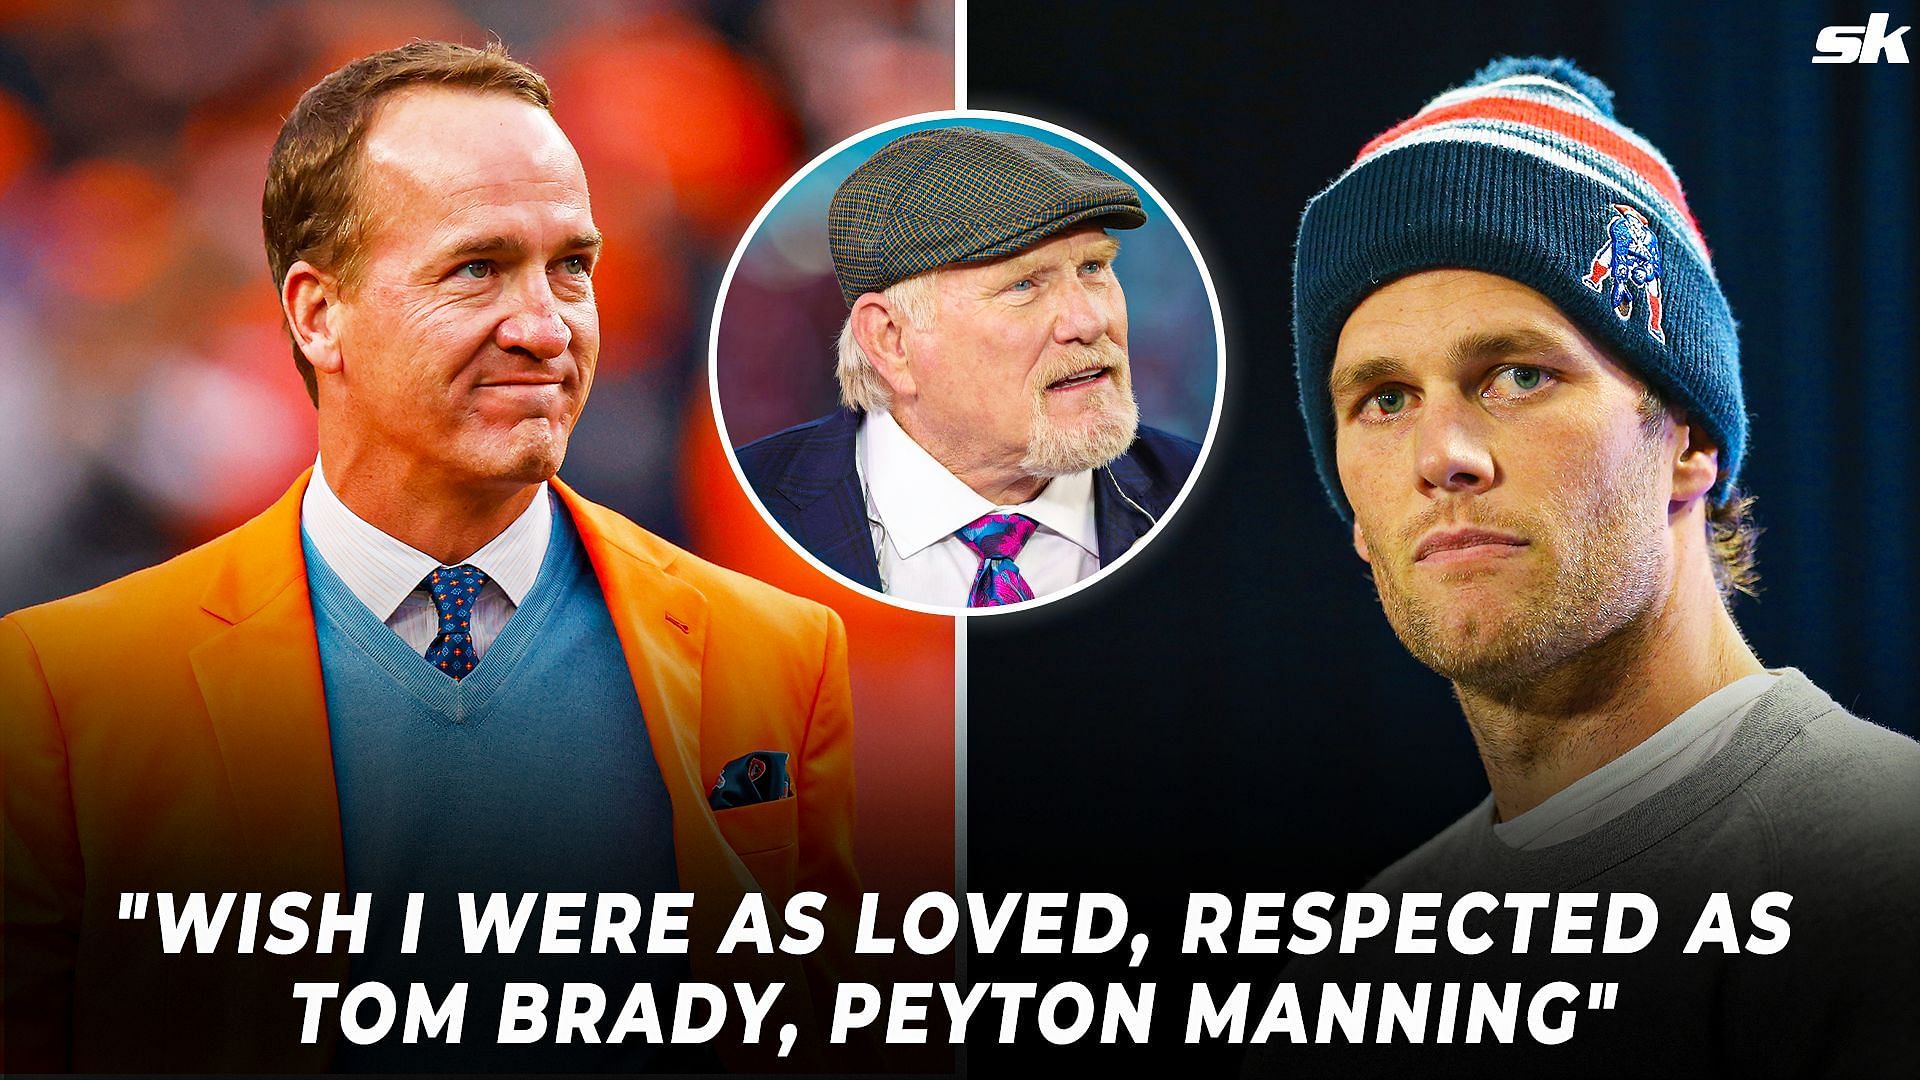 Bradshaw wanted more respect as a player